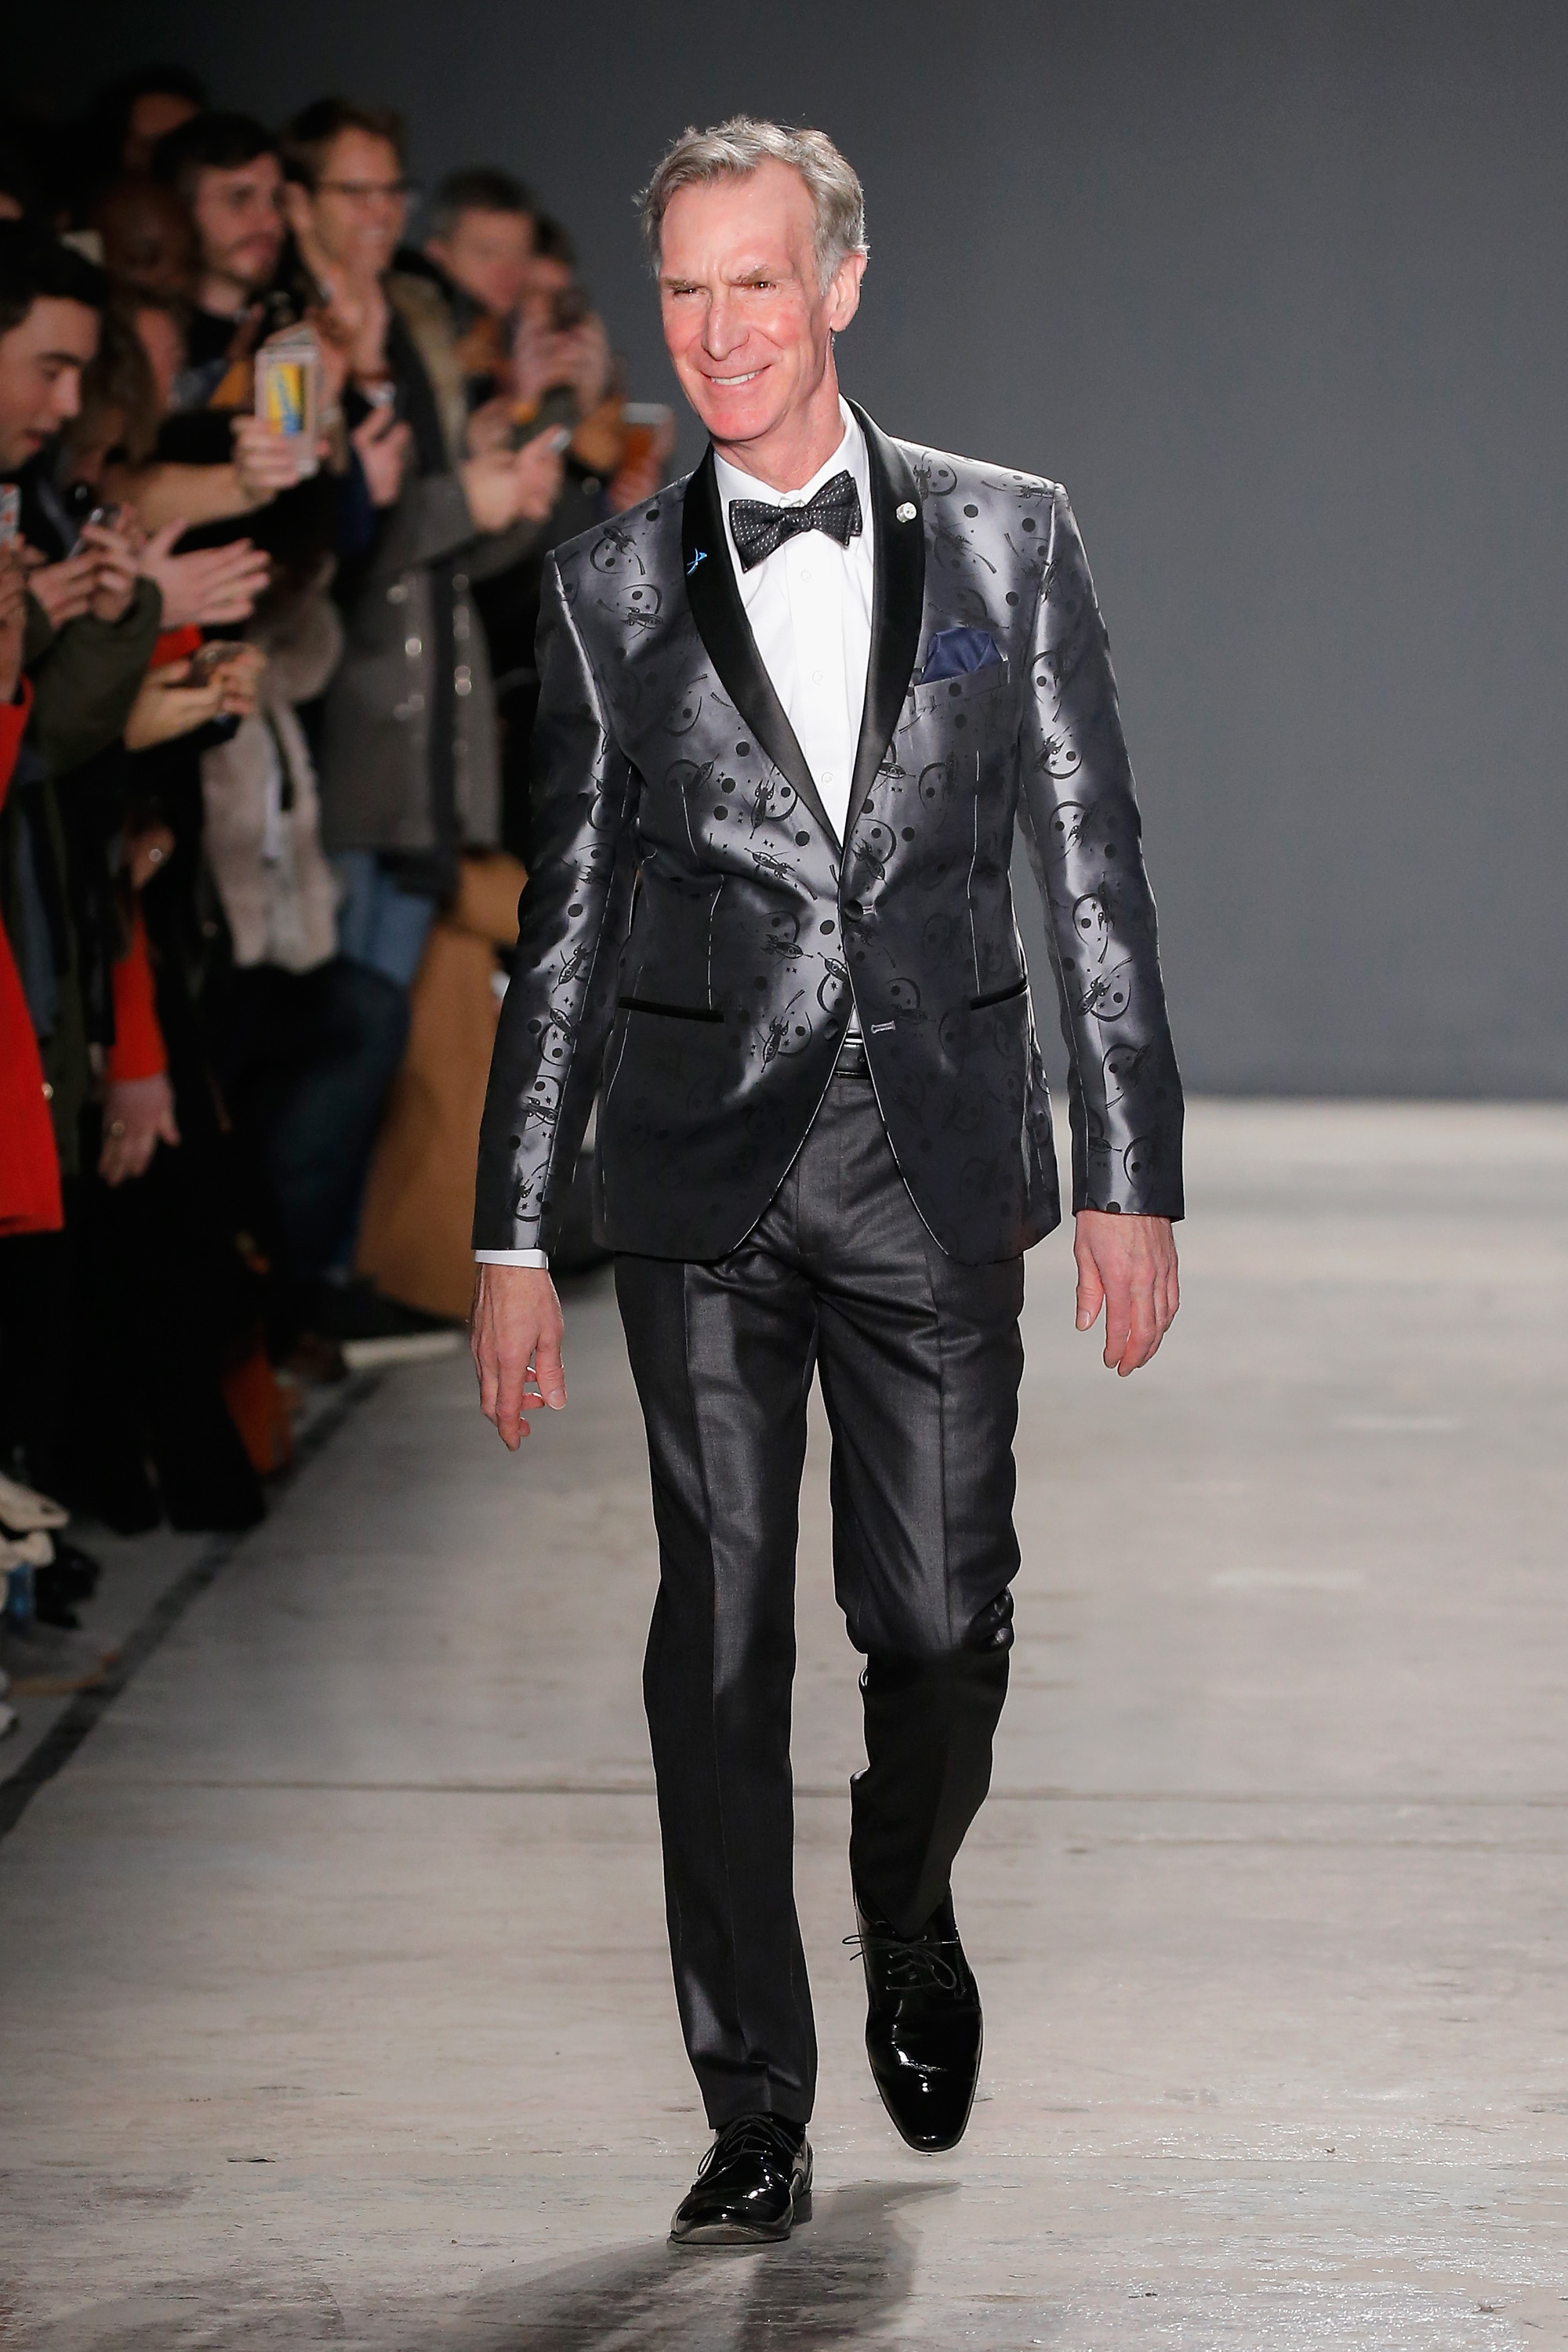 Bill Nye walks the runway at the Nick Graham NYFW Men's F/W '17 show on January 31, 2017 in New York City. (JP Yim&mdash;Getty Images for Nick Graham)